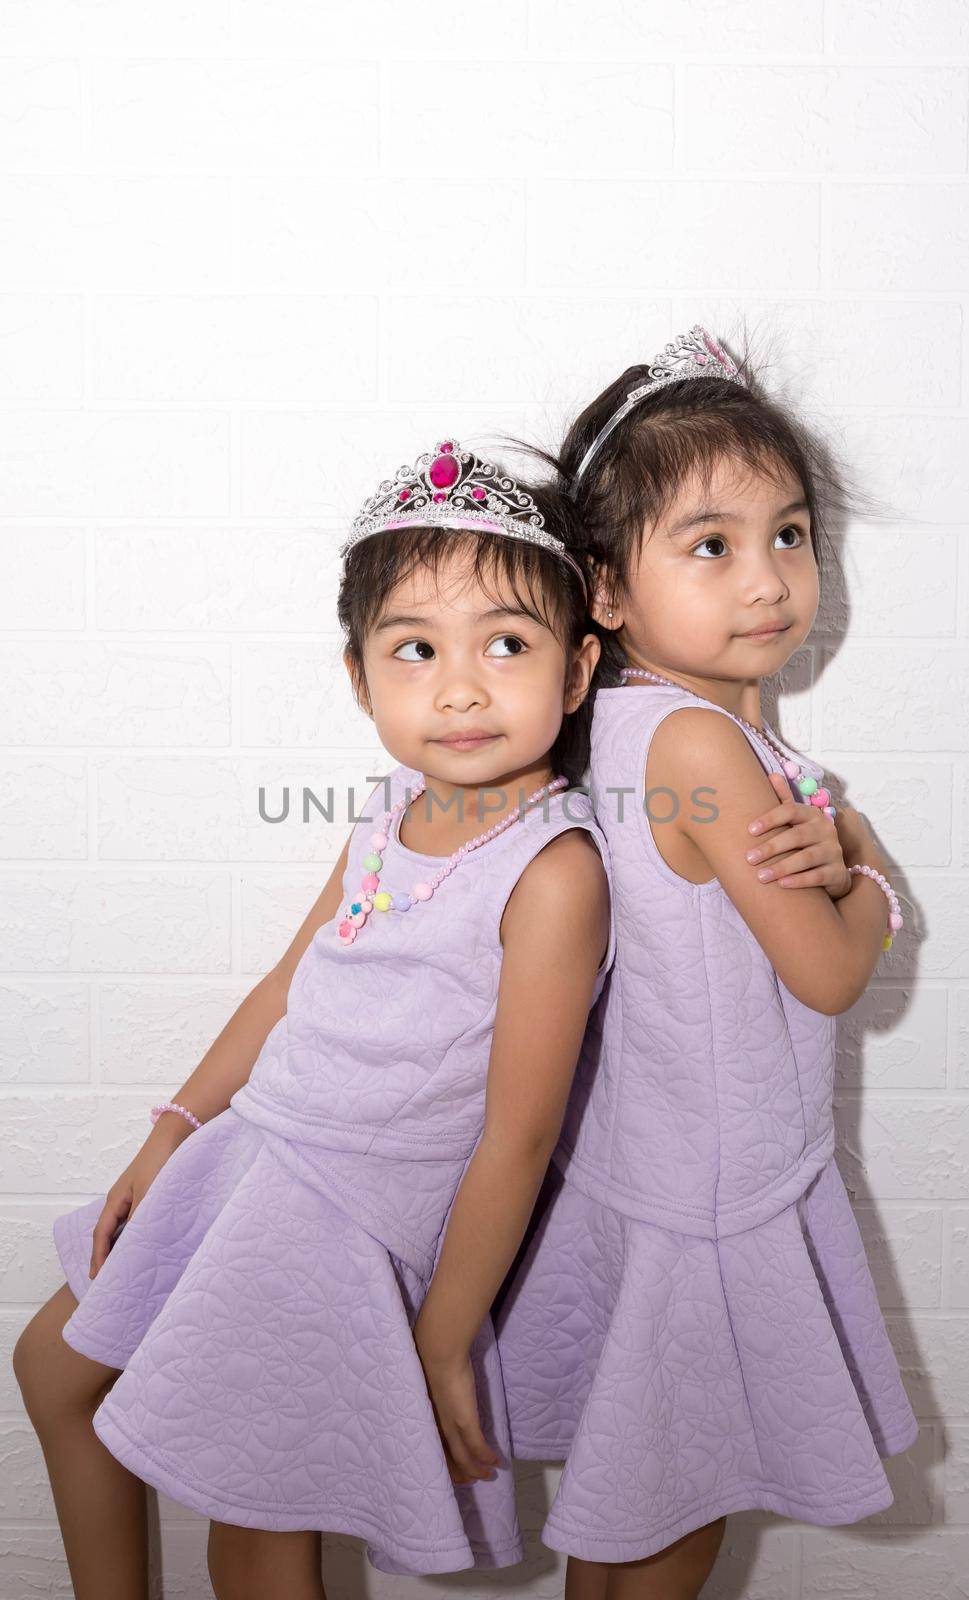 Female asian identical twins sitting on chair with white background. Wearing purple dress and accessories. Standing back to back with each other by billroque